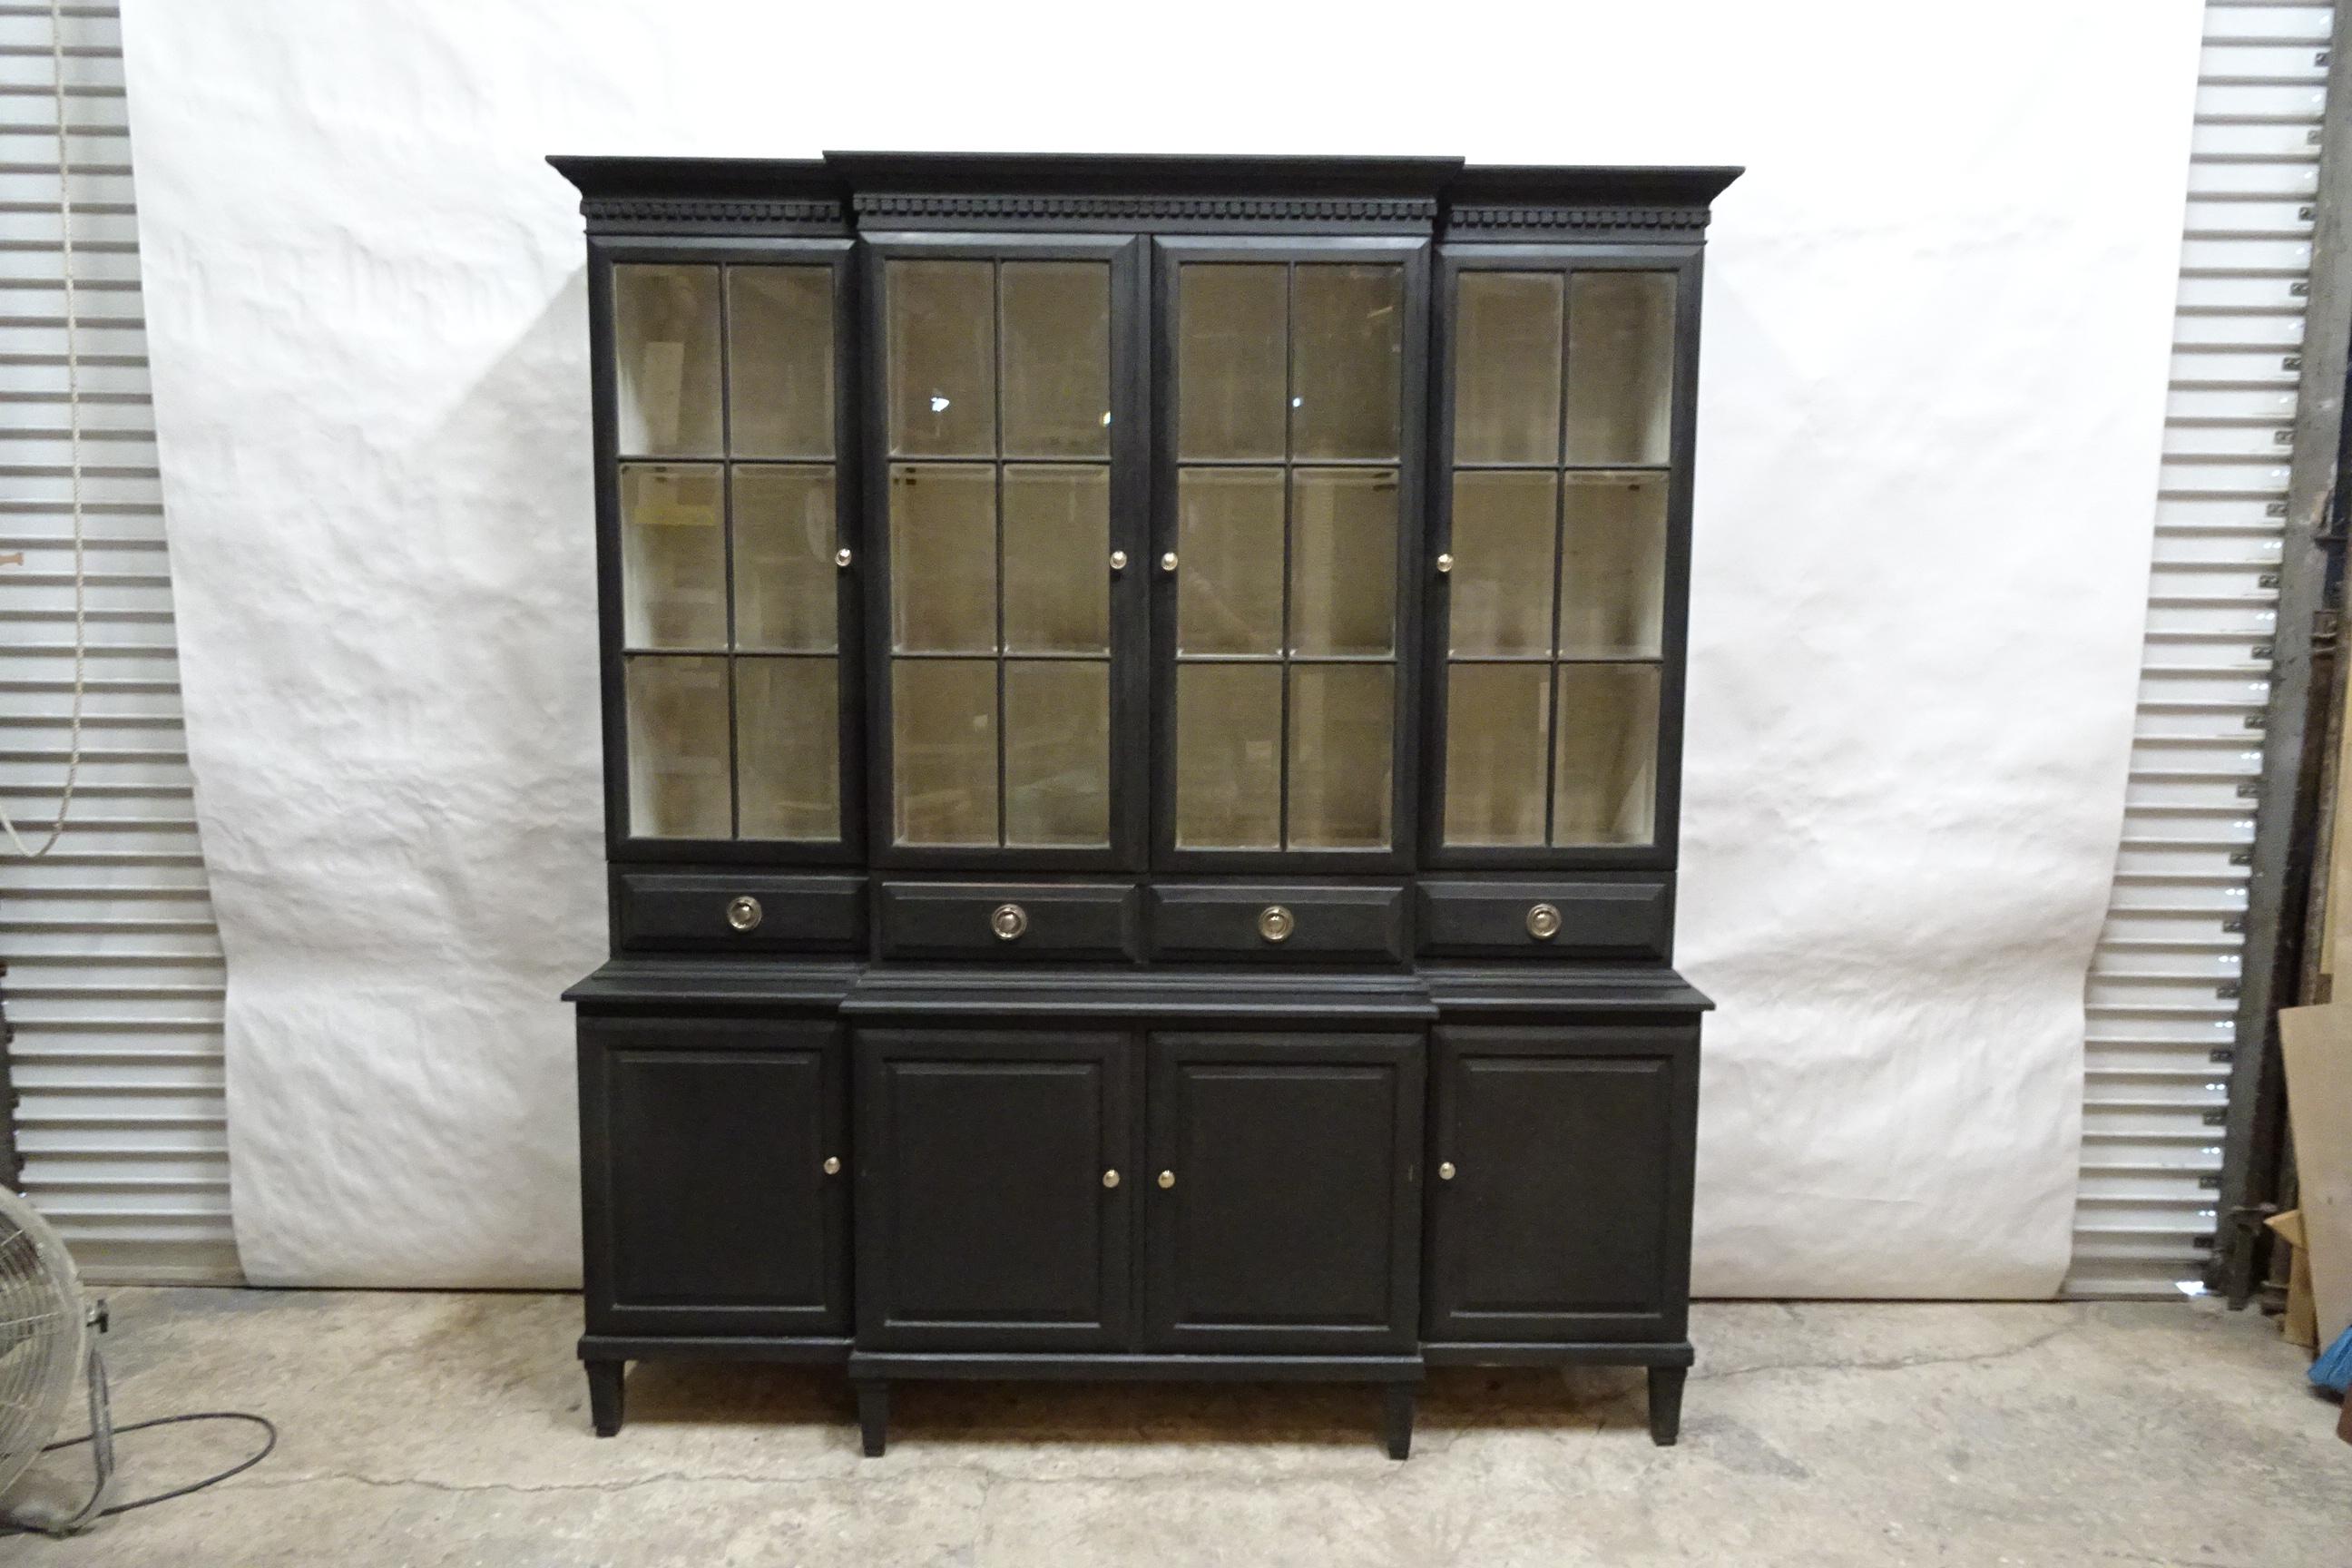 This is a Unique 4 glass door Swedish Gustavian style hutch. its been restored and repainted with Milk Paints 